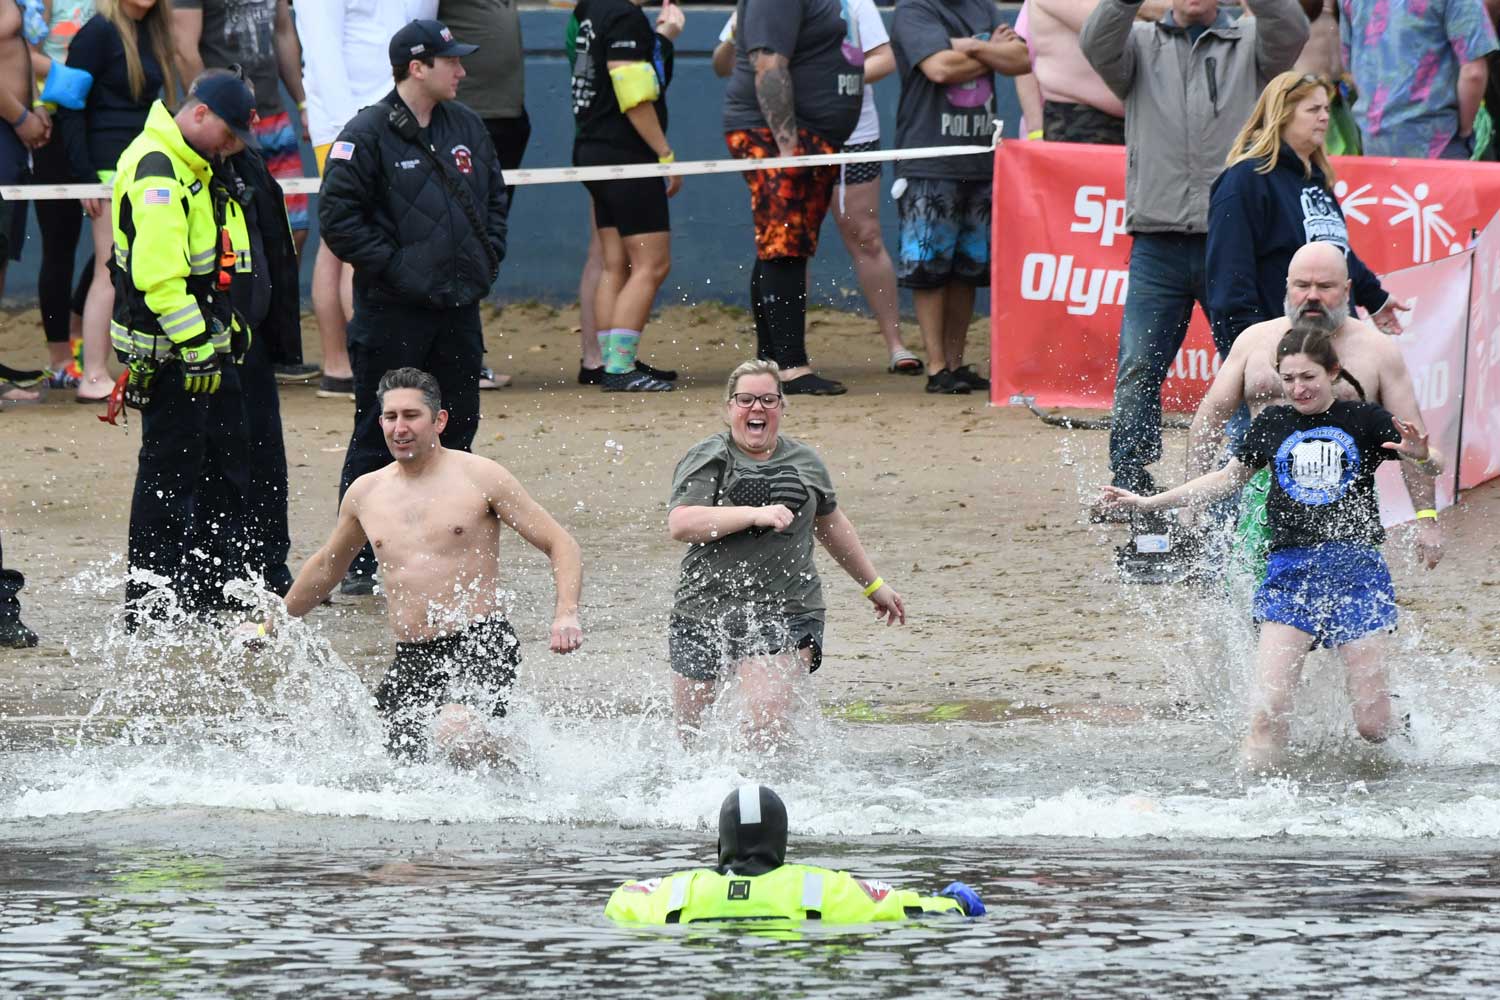 People splash into the water during the Polar Plunge